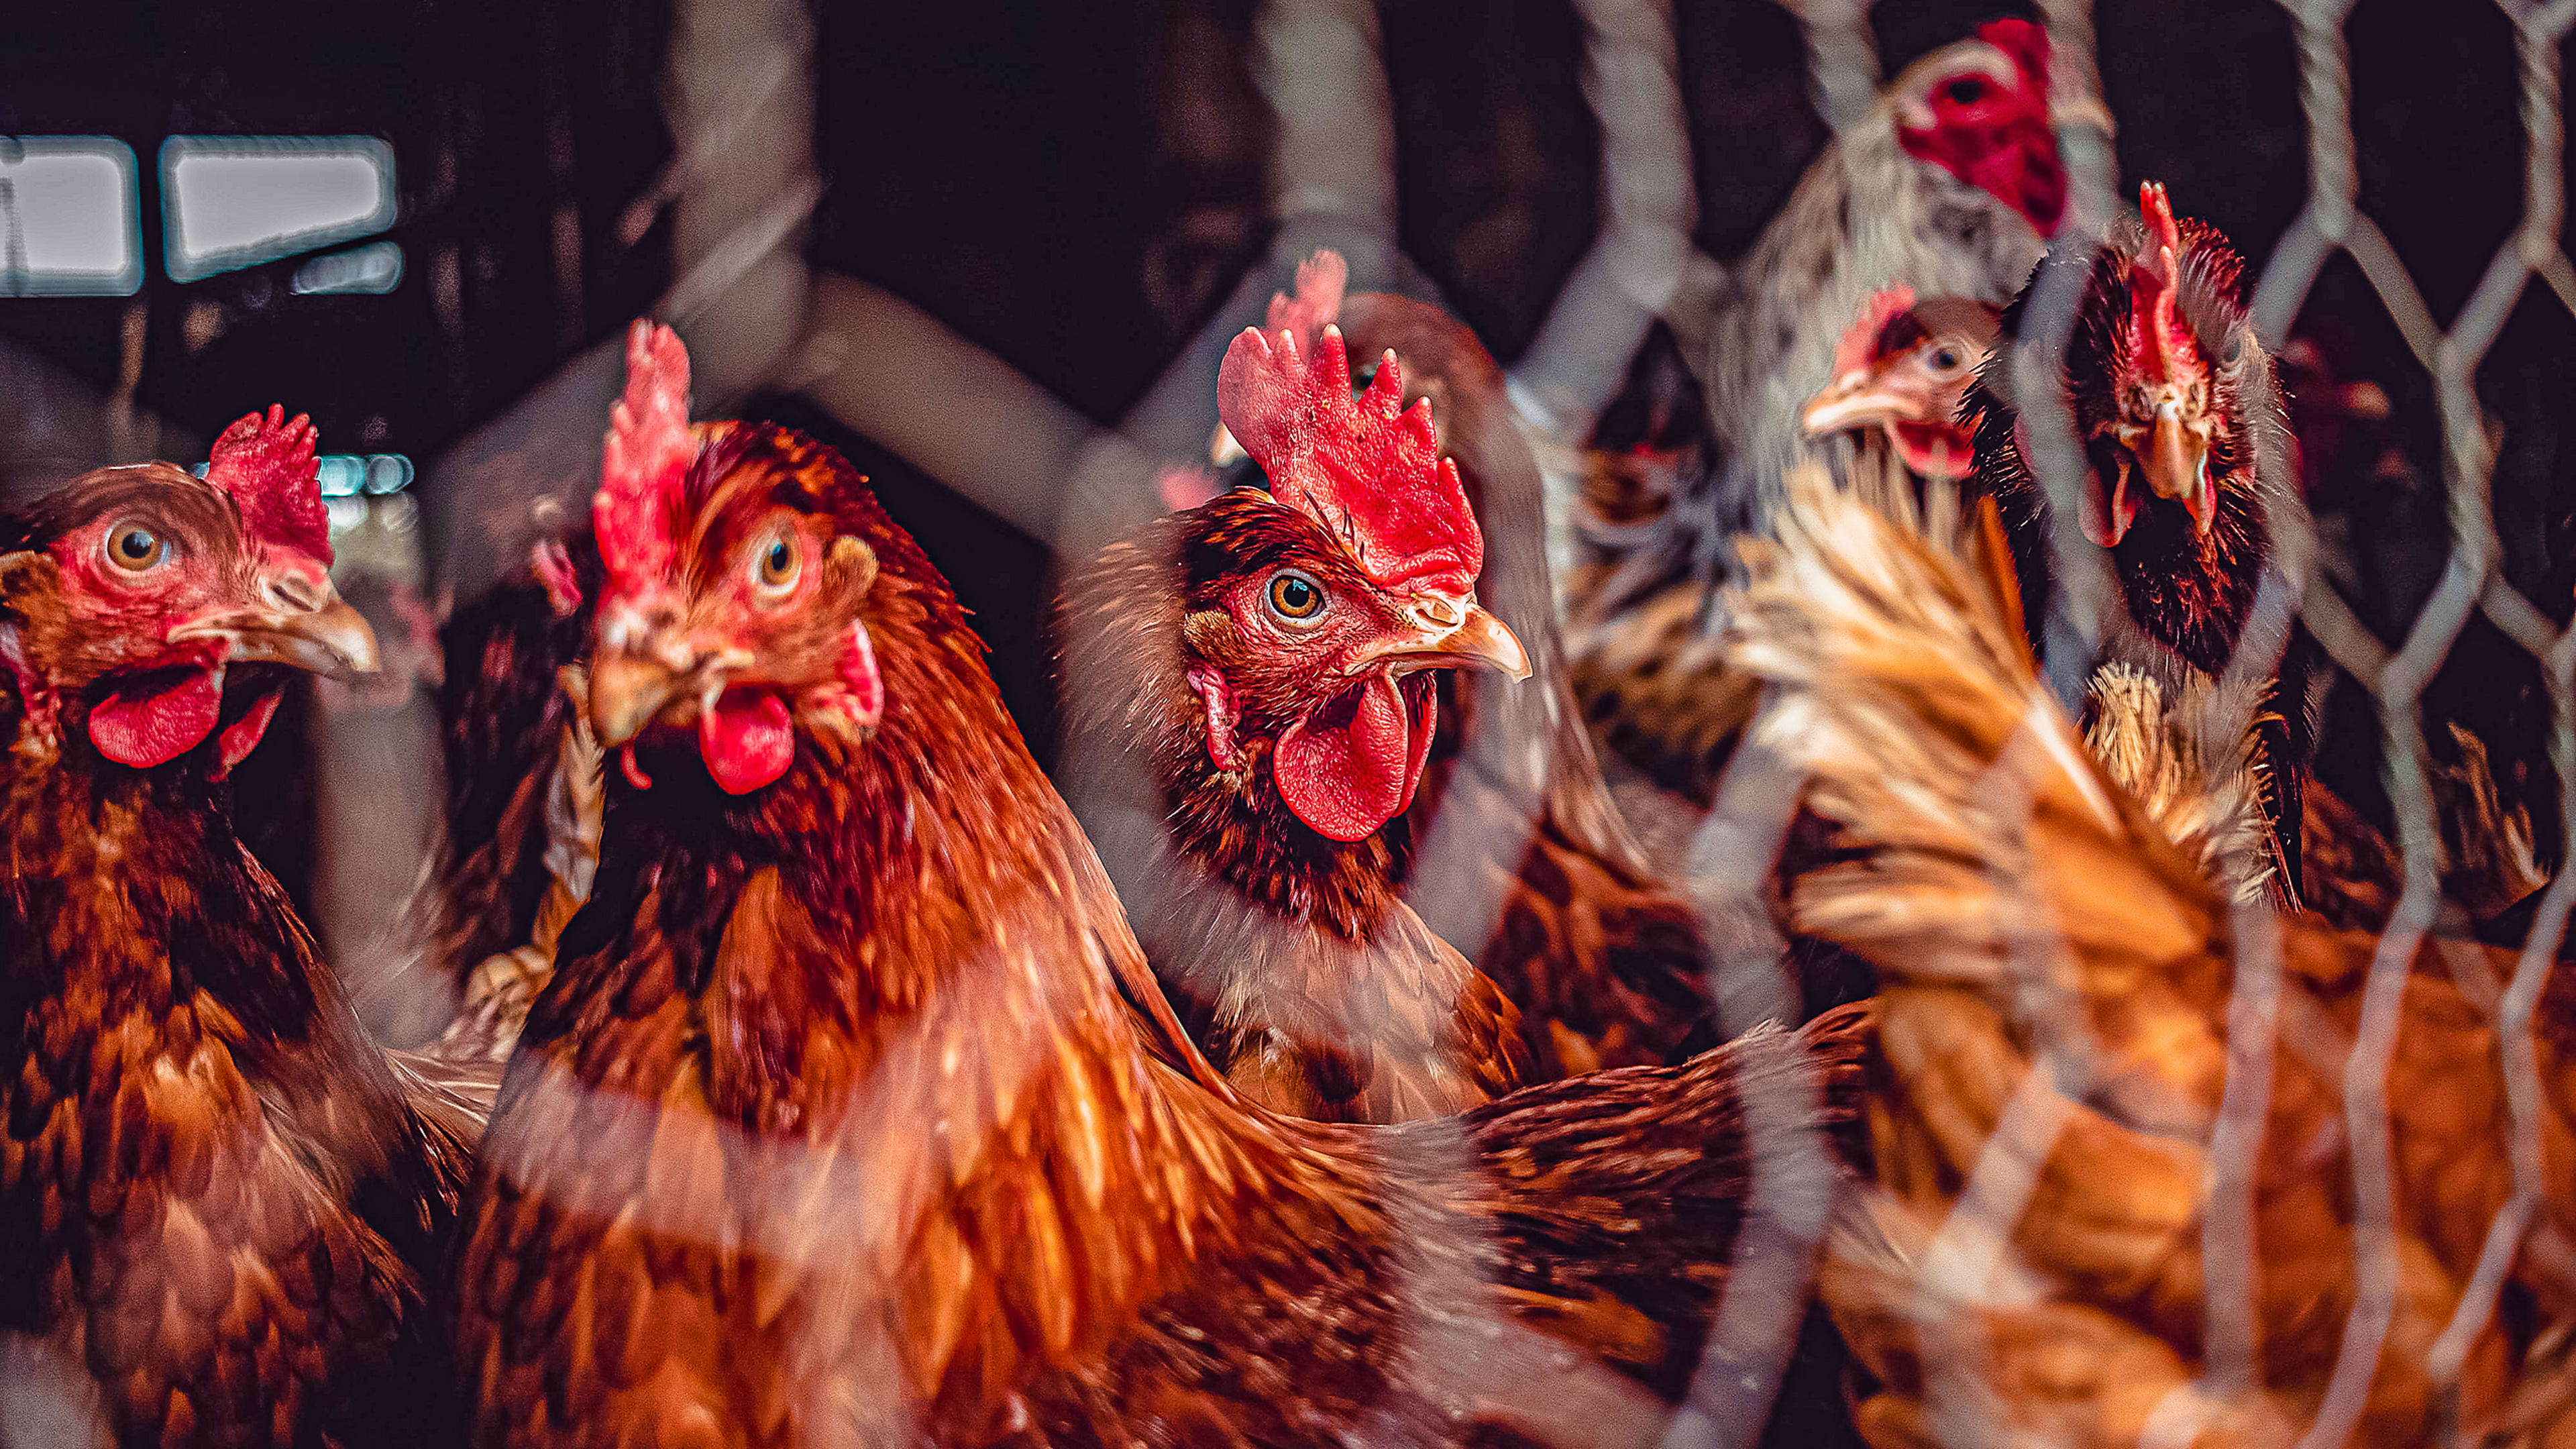 Avian flu outbreak: Symptoms, vaccines, and what’s being done to curb the spread